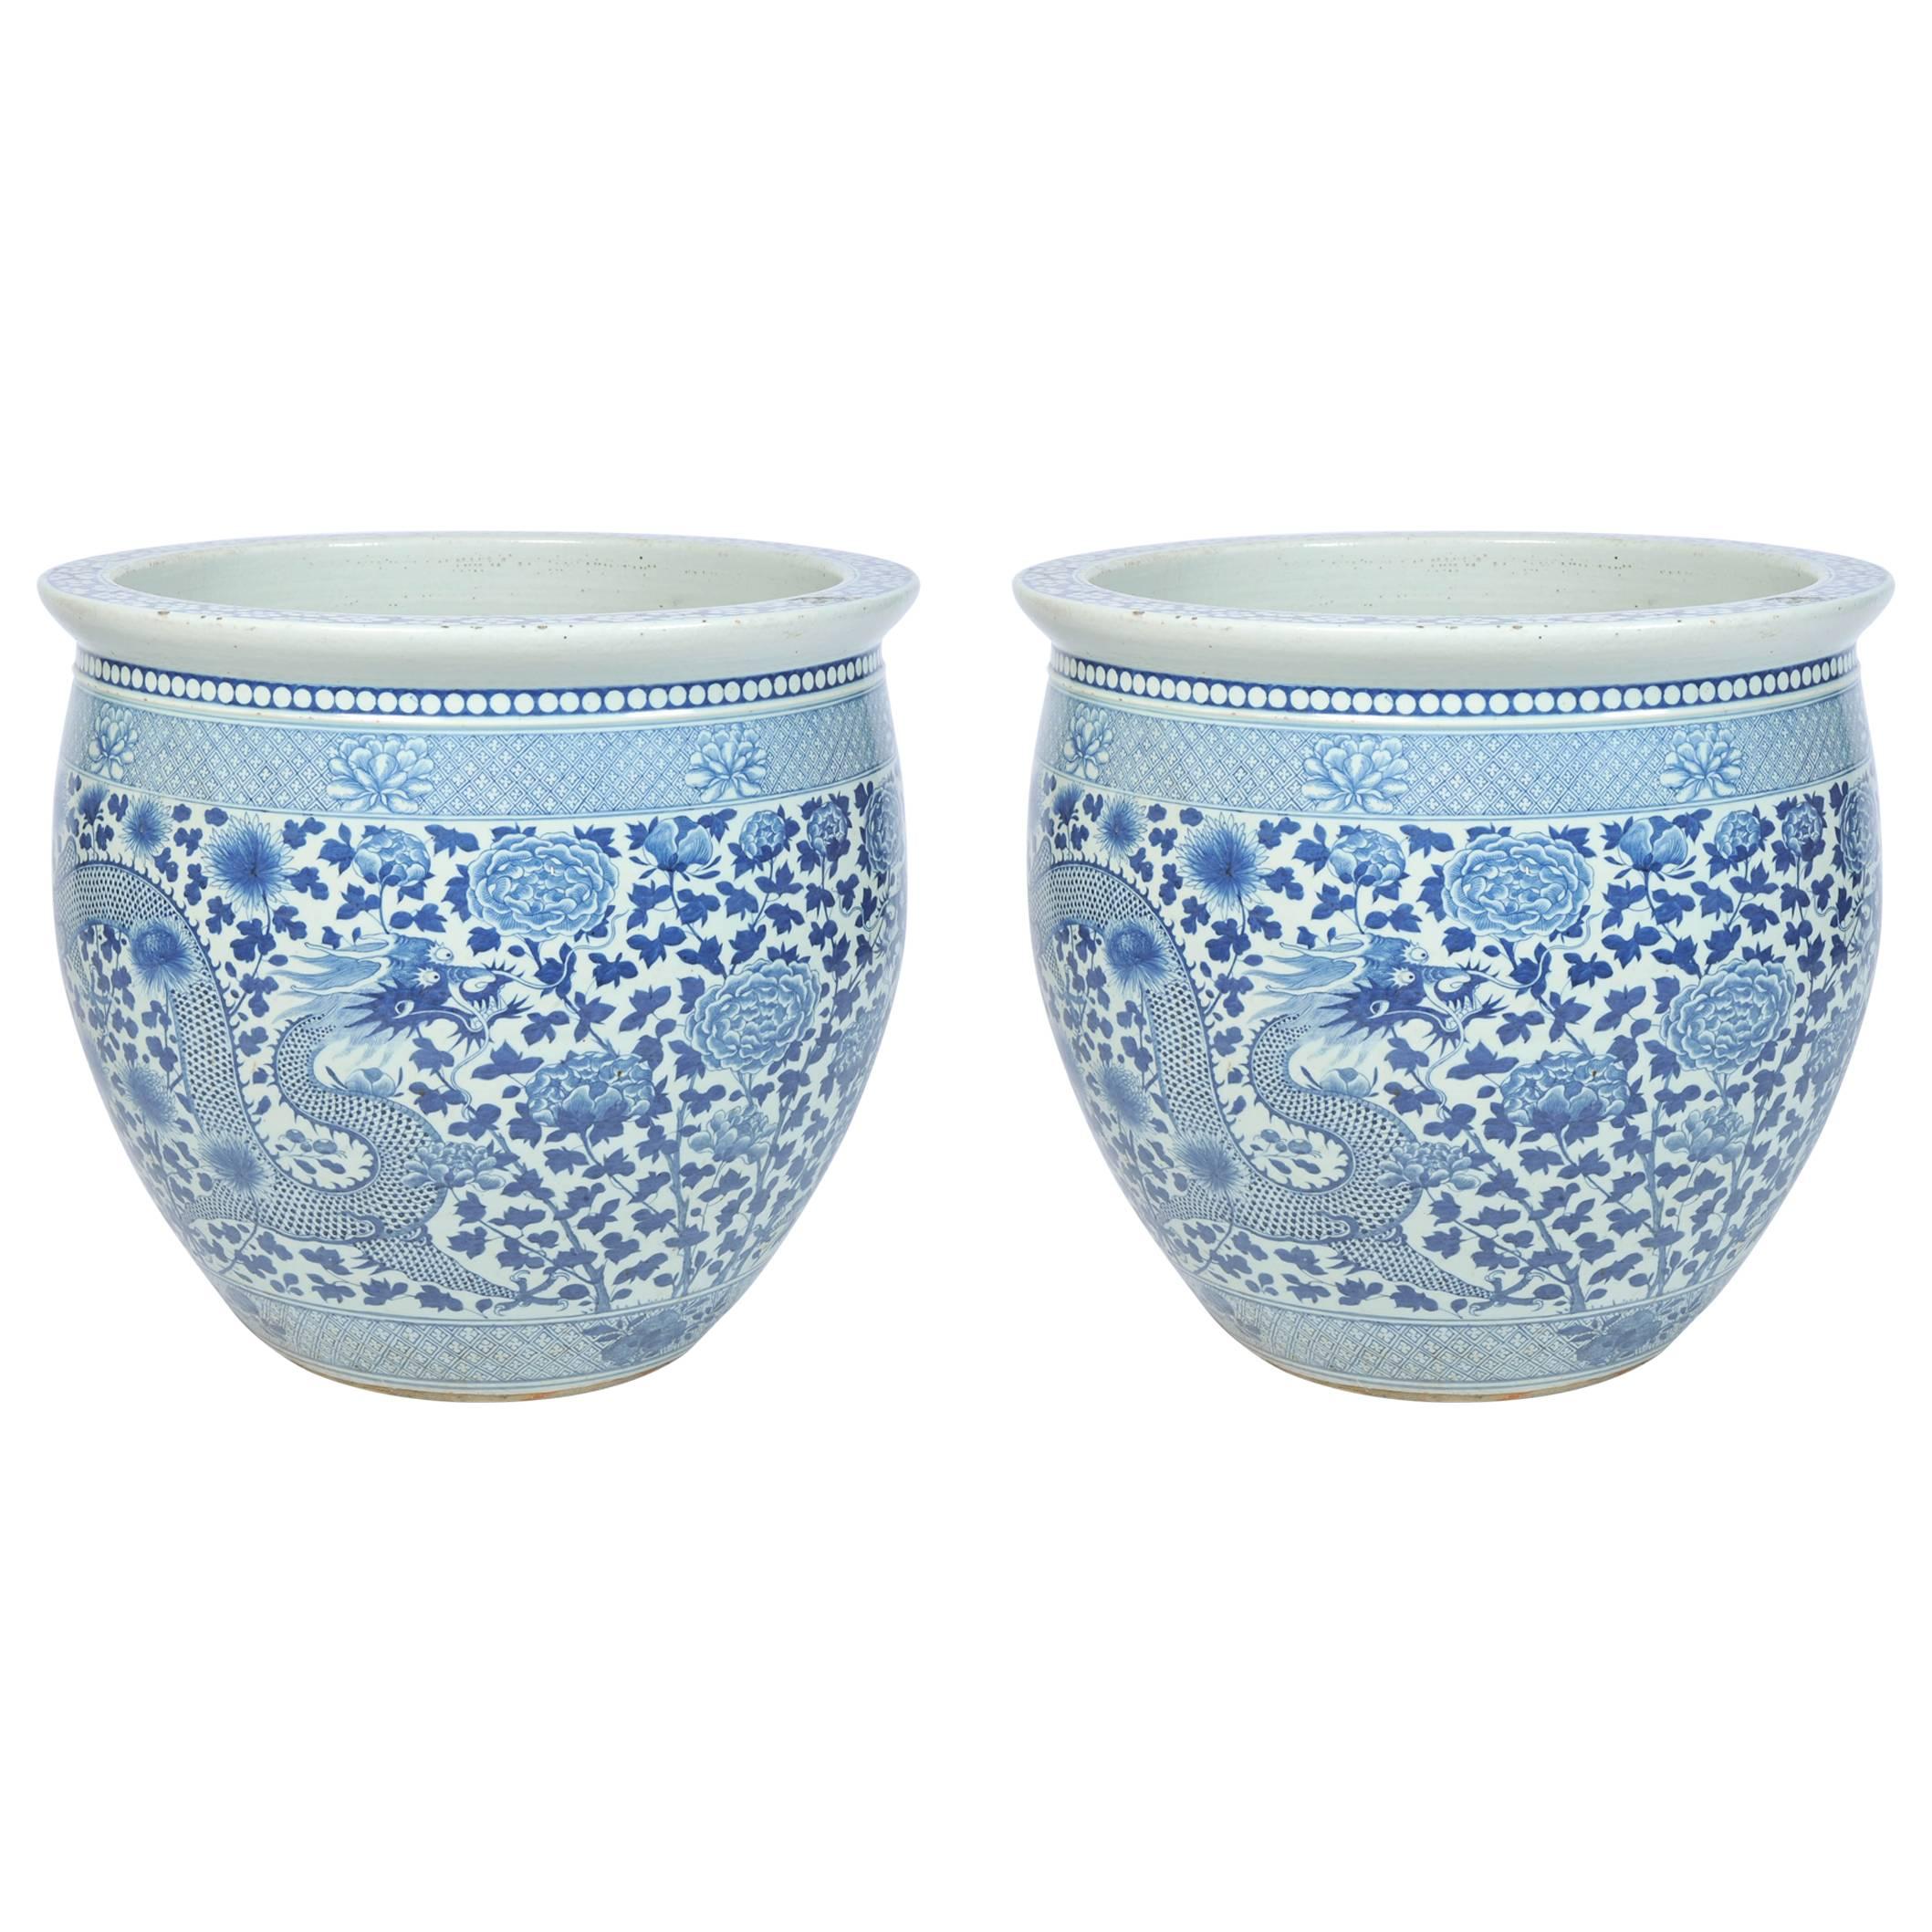 Pair of 19th Century Chinese Blue and White Jardinieres